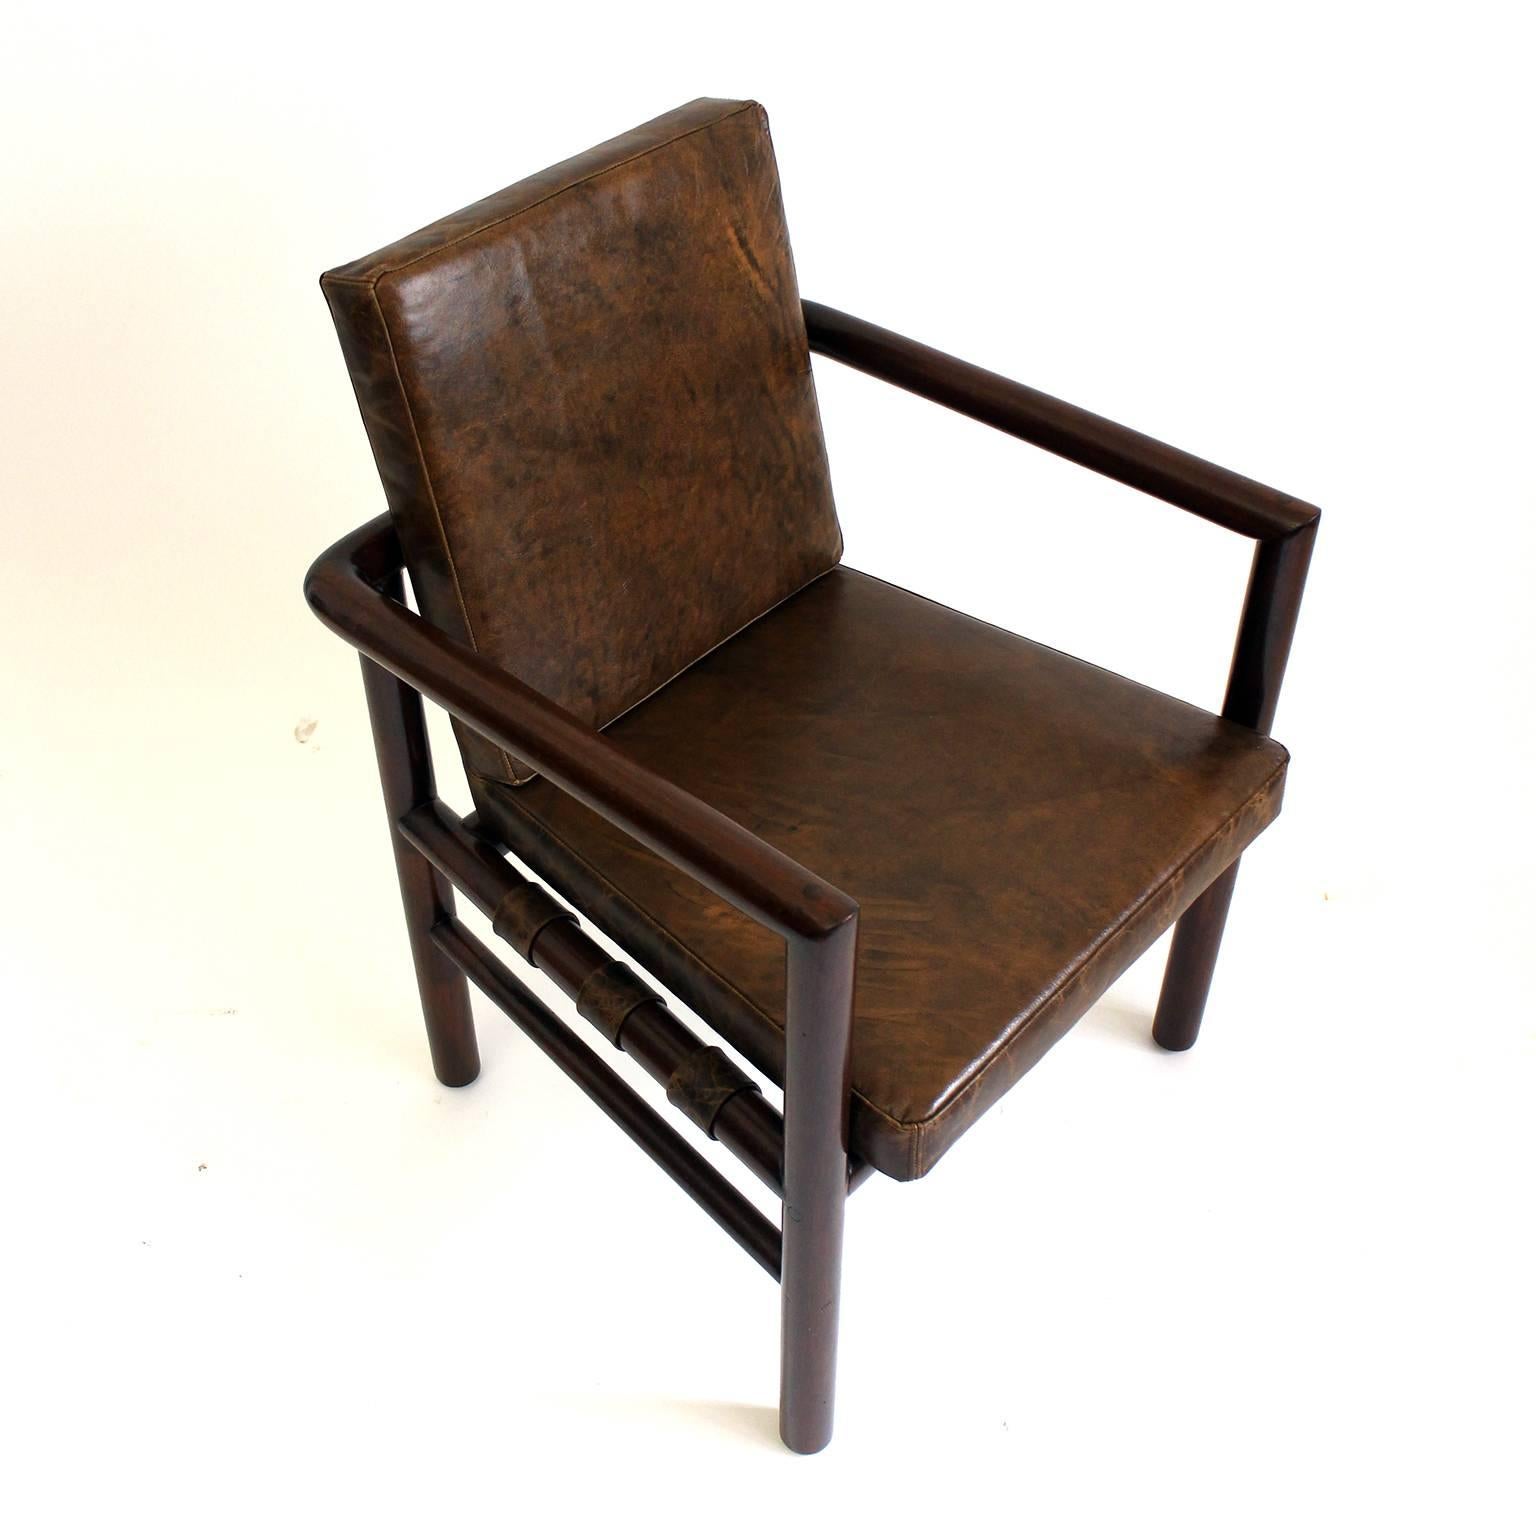 Mexican Fabulous Chairs Attributed to Francisco Artigas, circa 1970s